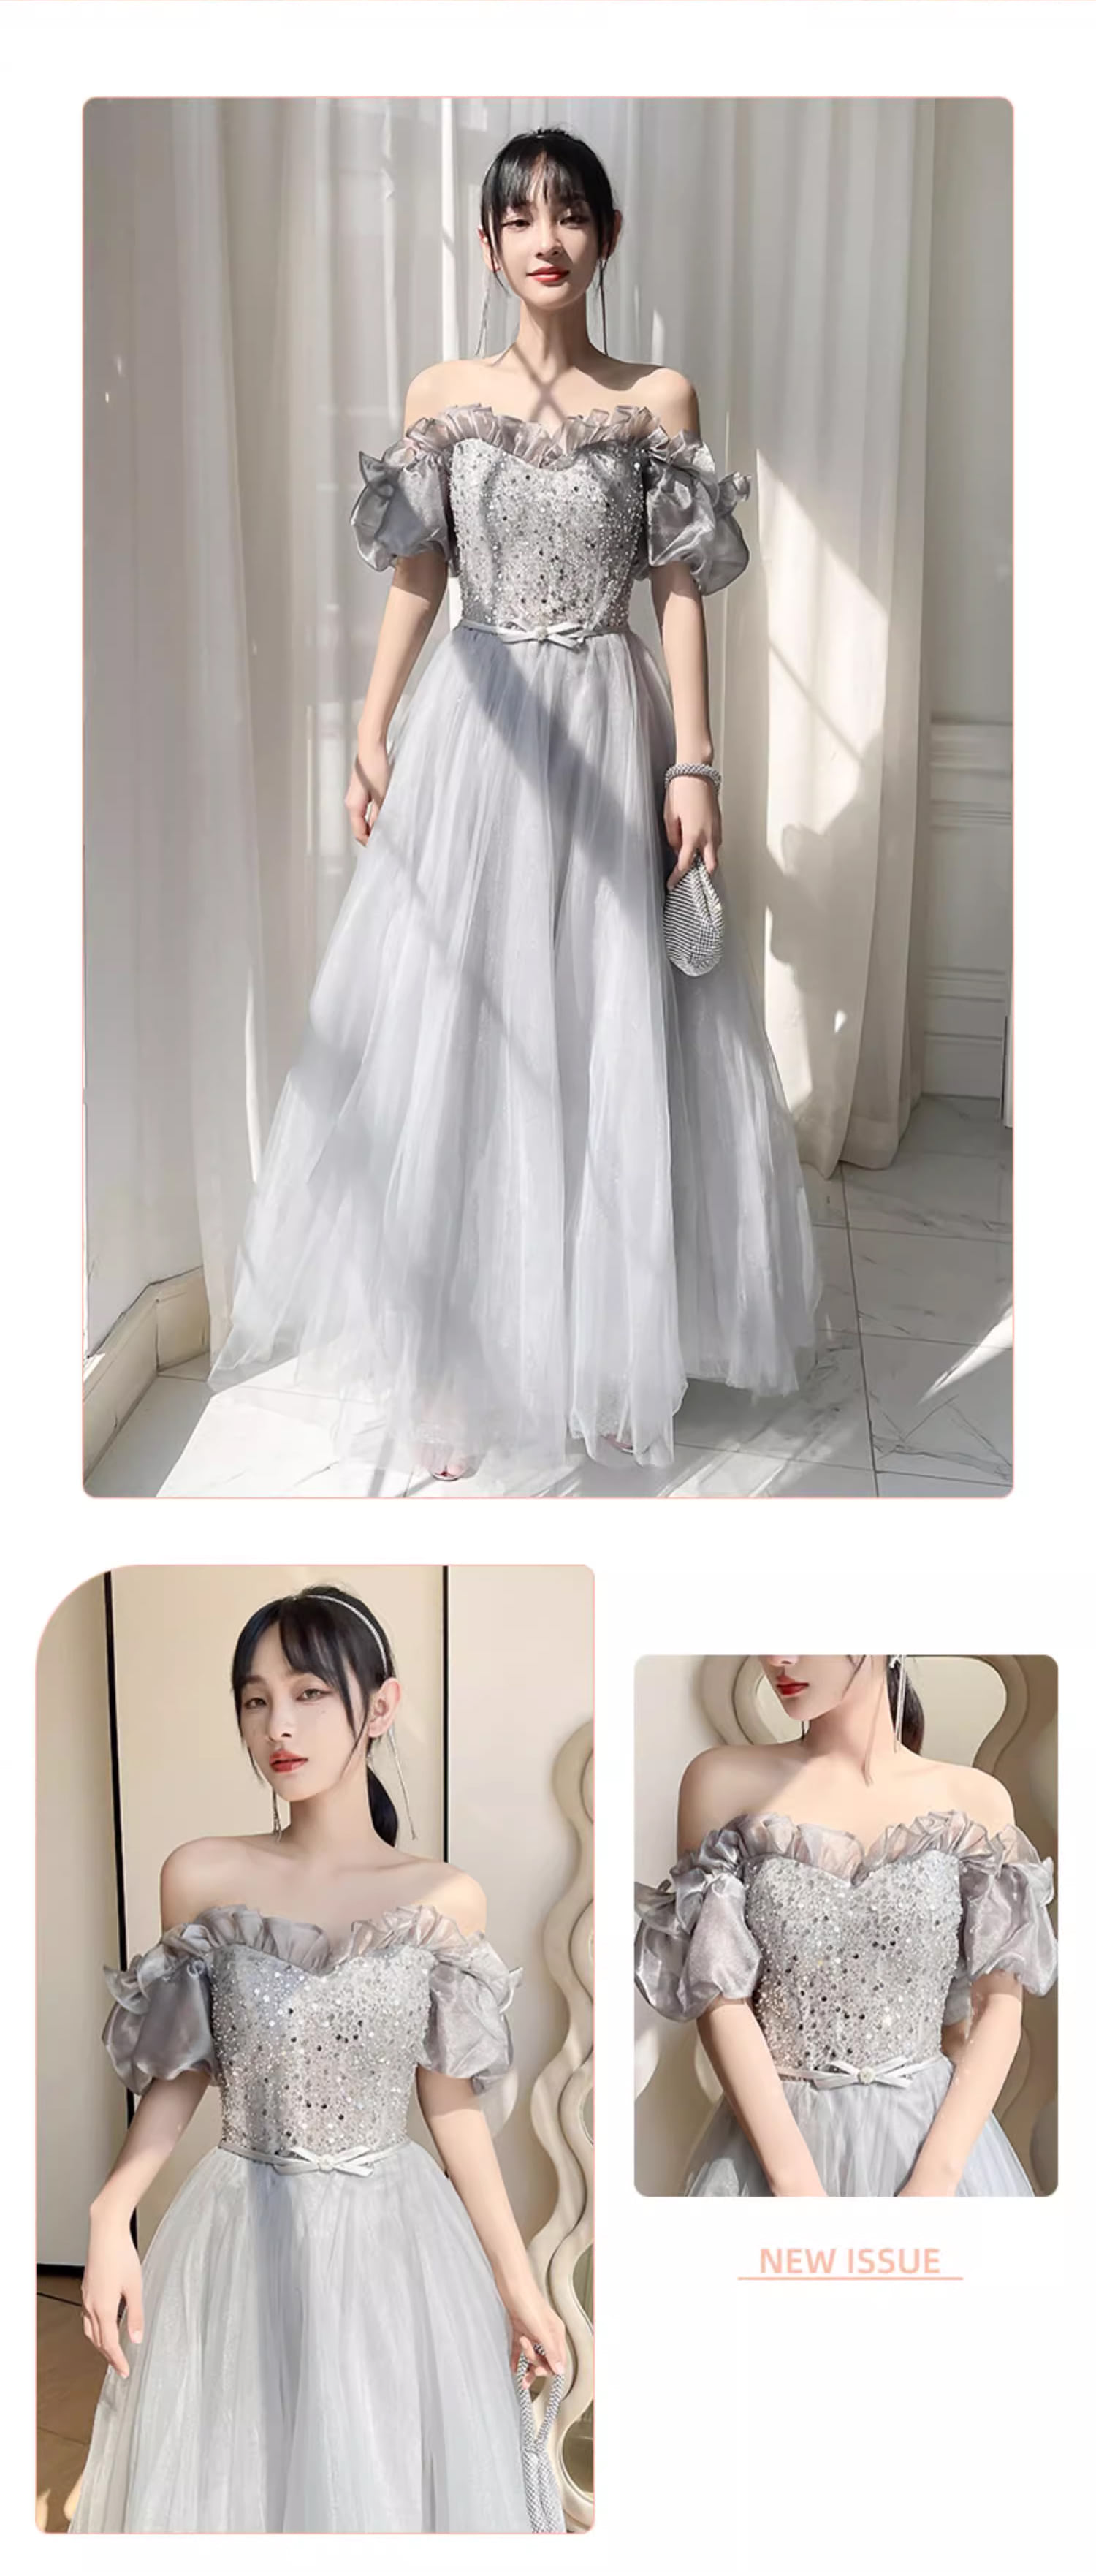 Fashion-A-line-Summer-Grey-Tulle-Evening-Prom-Bridesmaid-Maxi-Dress14